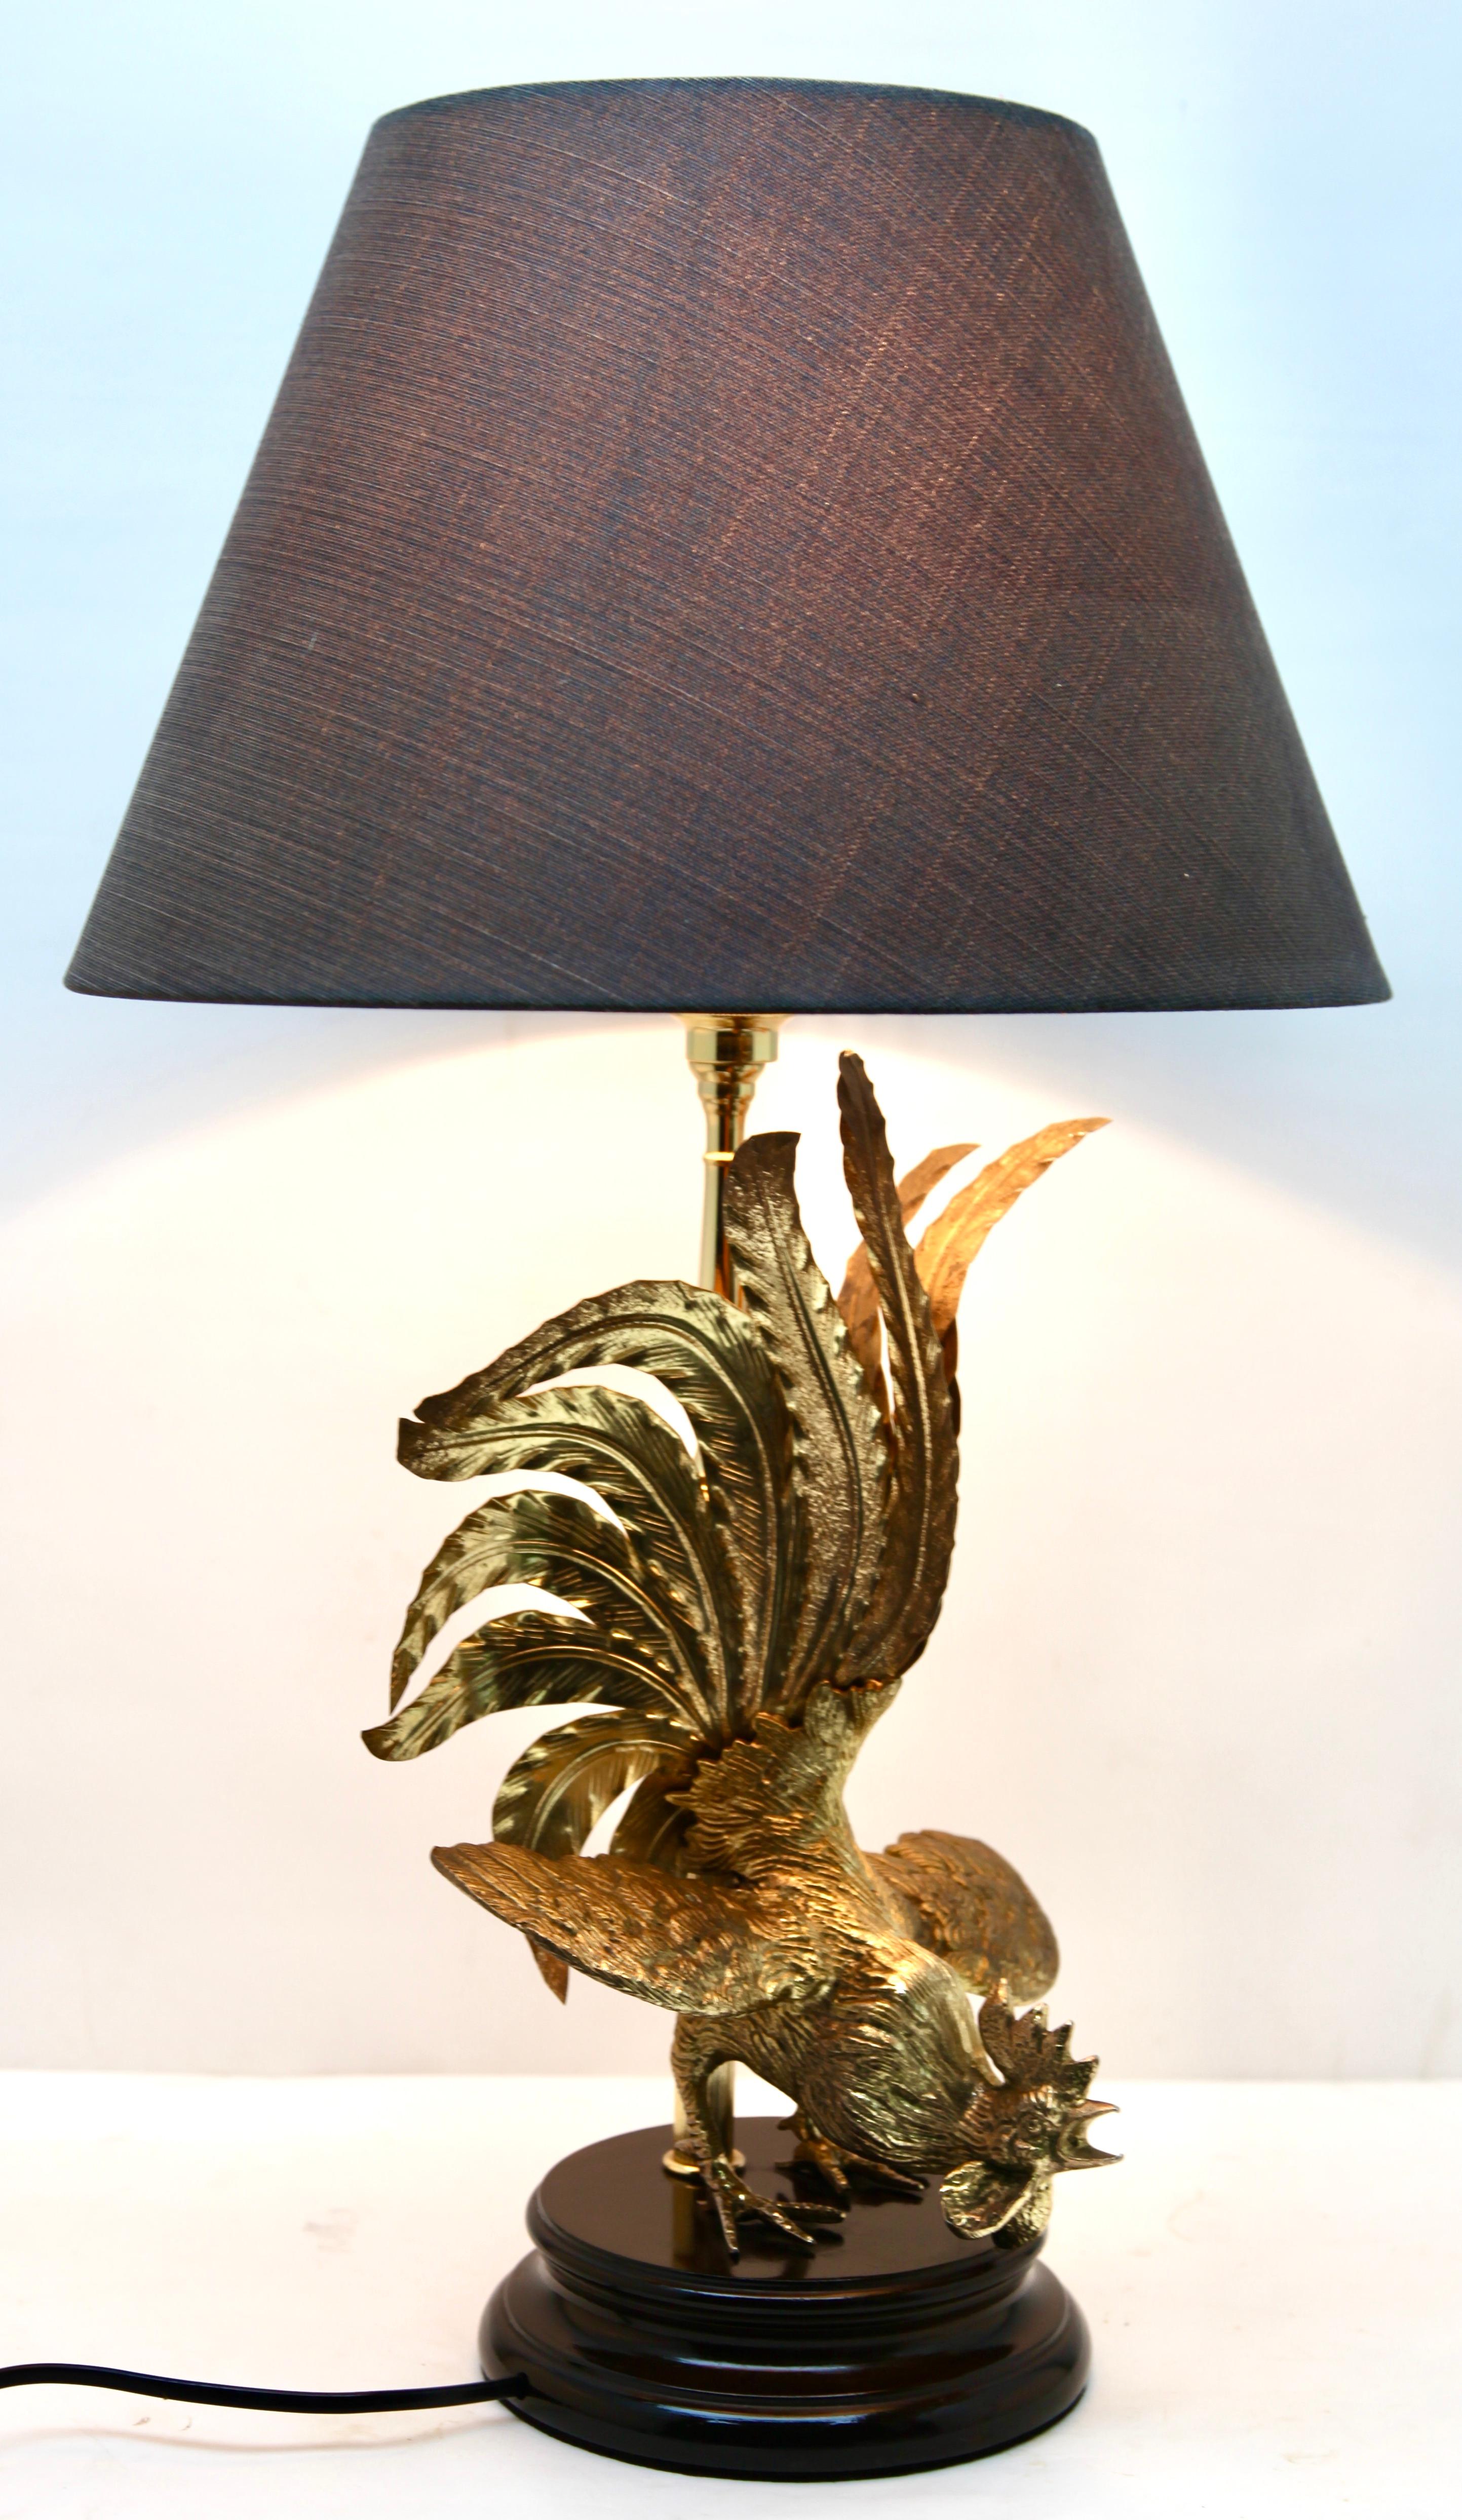 Gorgeous table lamp with wooden base 
Made in France during the 1960s in the style of Maison Jansen.

In excellent condition (Original Patina) and in full working order 
And safe for usage in the World with European standards.
Standard fitting (E27